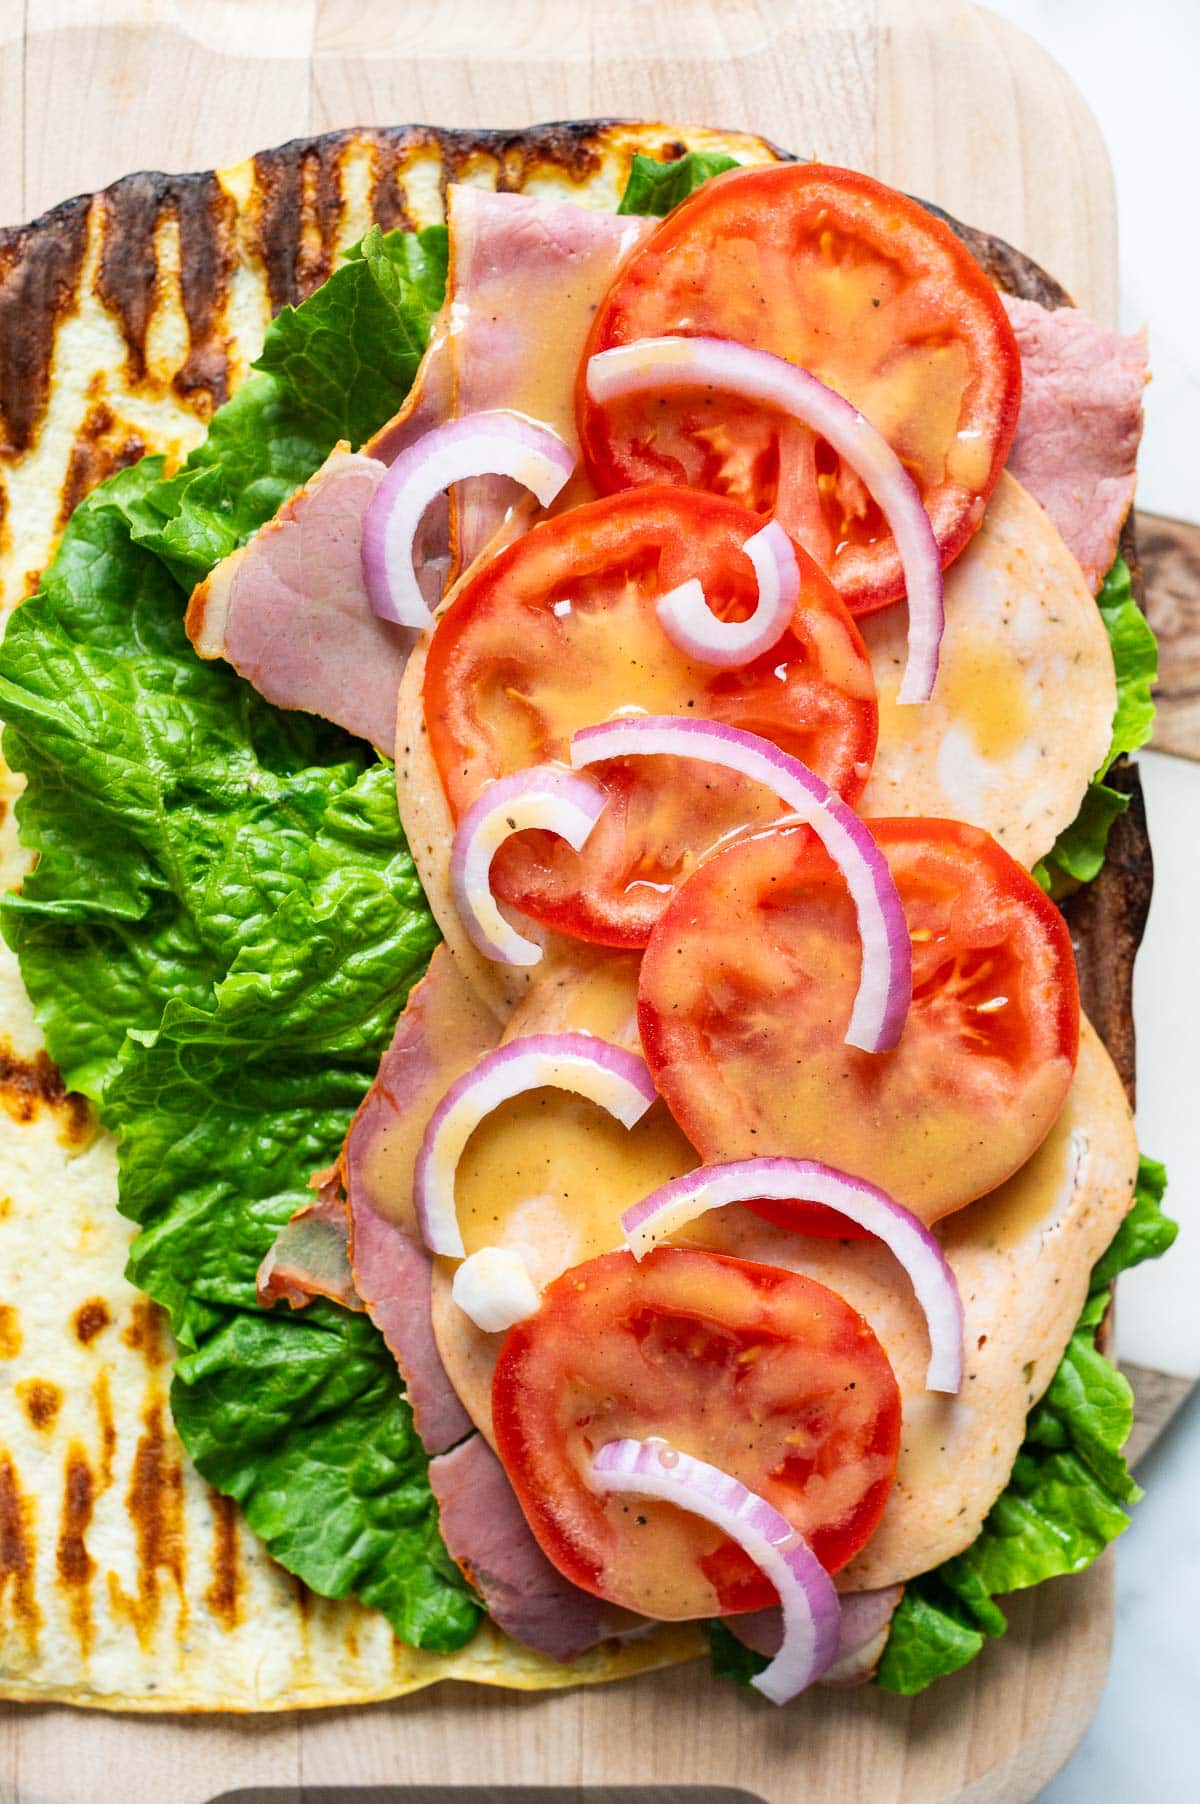 Lettuce, deli meat, tomatoes, red onion and honey mustard on cottage cheese flatbread.